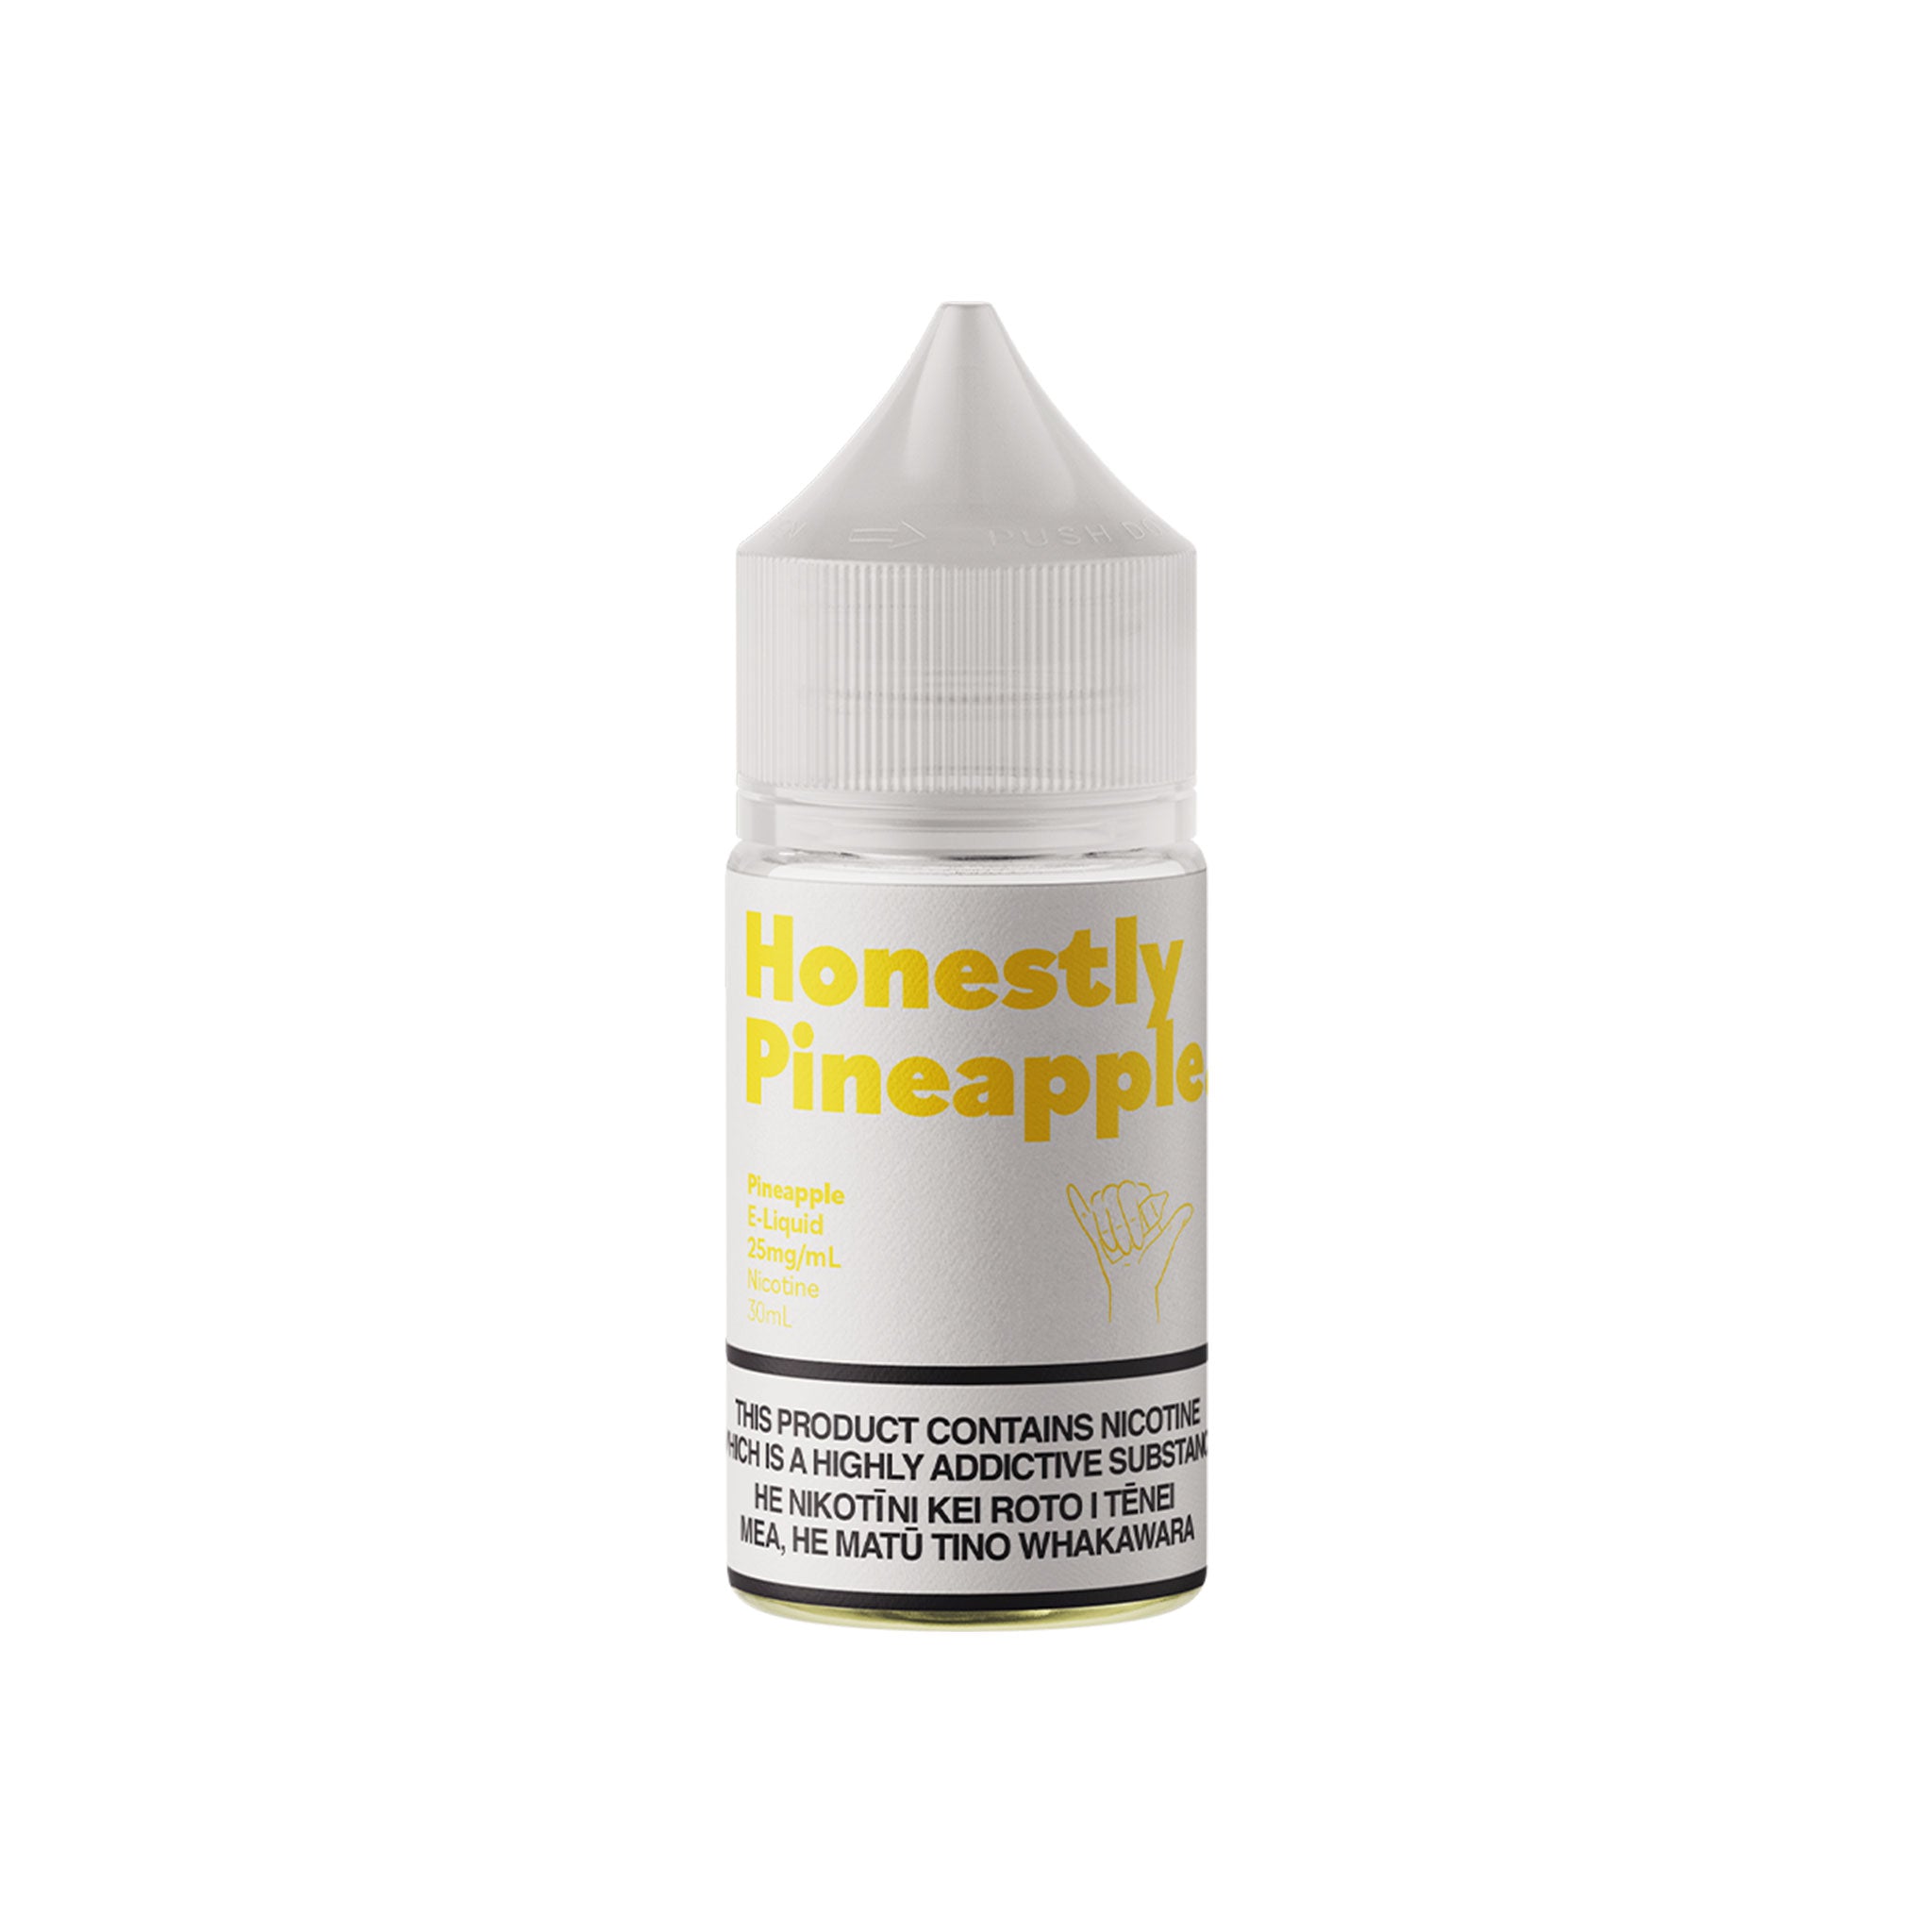 Pineapple Salts by Honestly